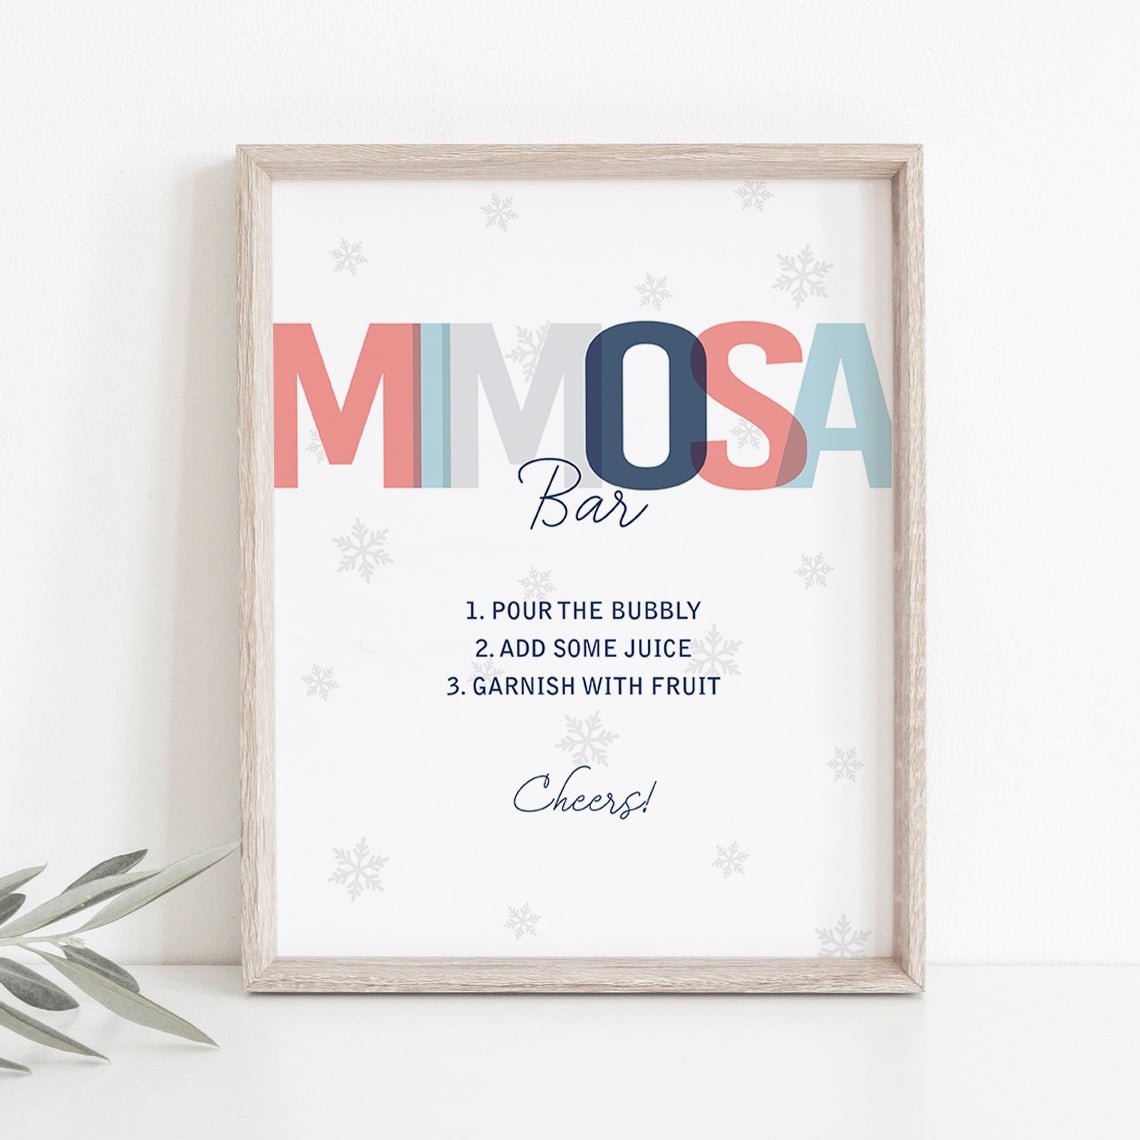 Printable sign for mimosa bar with snowflakes by LittleSizzle